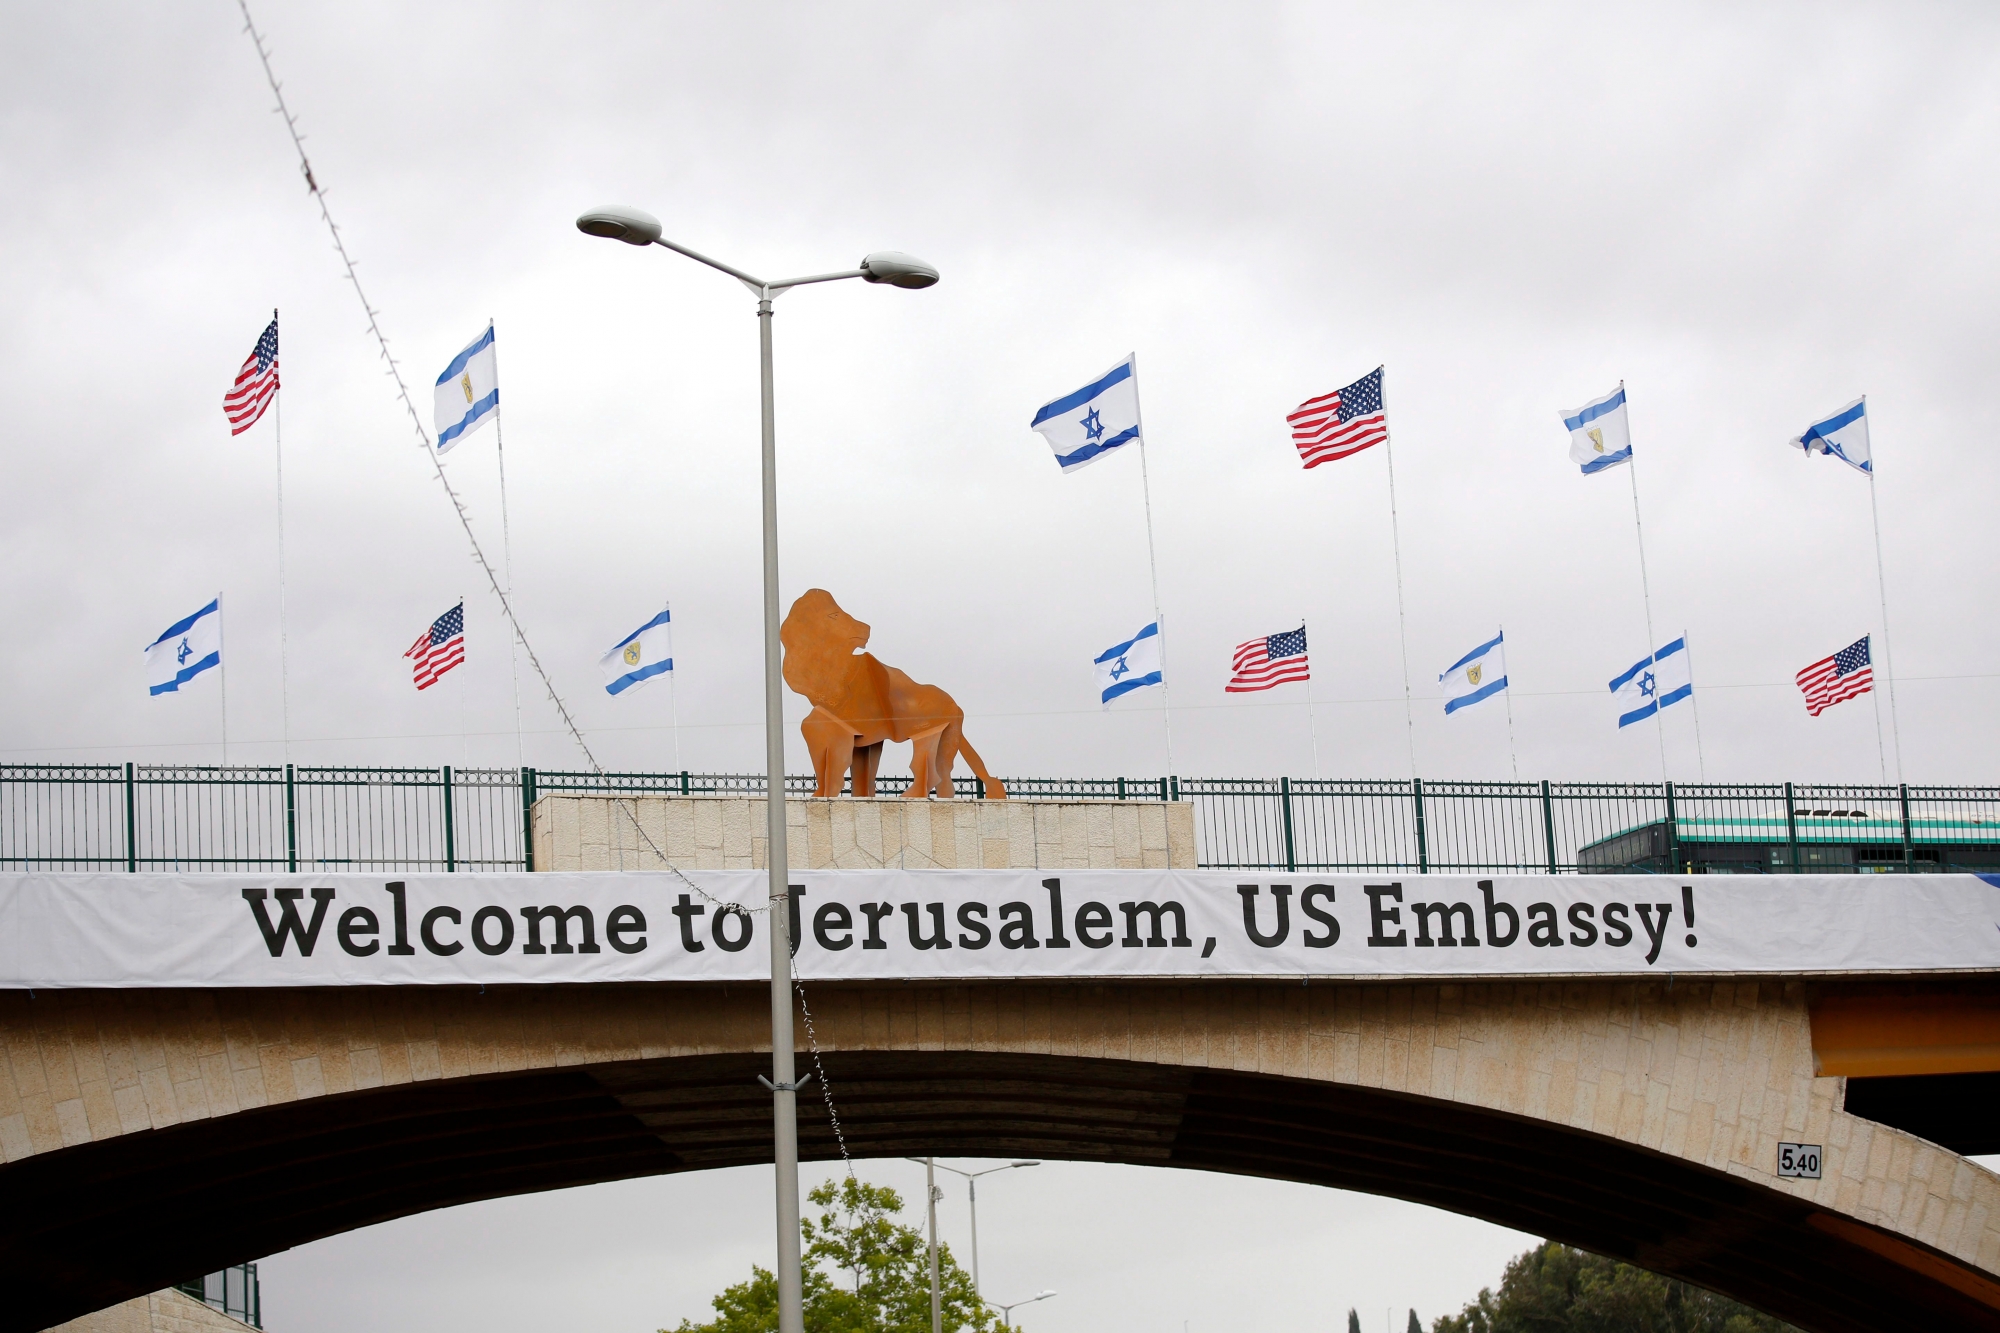 epa06732610 A sign and flags hung on a bridge nearby the US consulate that will act as the new US embassy in the Jewish neighborhood of Arnona, on the East-West Jerusalem line in Jerusalem, Israel, 13 May 2018. Trump's administration will officially transfer the ambassador's offices to the consulate building and temporarily use it as the new US Embassy in Jerusalem as of 14 May 2018. Trump in December 2017 recognized Jerusalem as Israel's capital and announced an embassy move from Tel Aviv, prompting protests in the occupied Palestinian territories and several Muslim-majority countries.  EPA/ABIR SULTAN MIDEAST ISRAEL USA EMBASSY